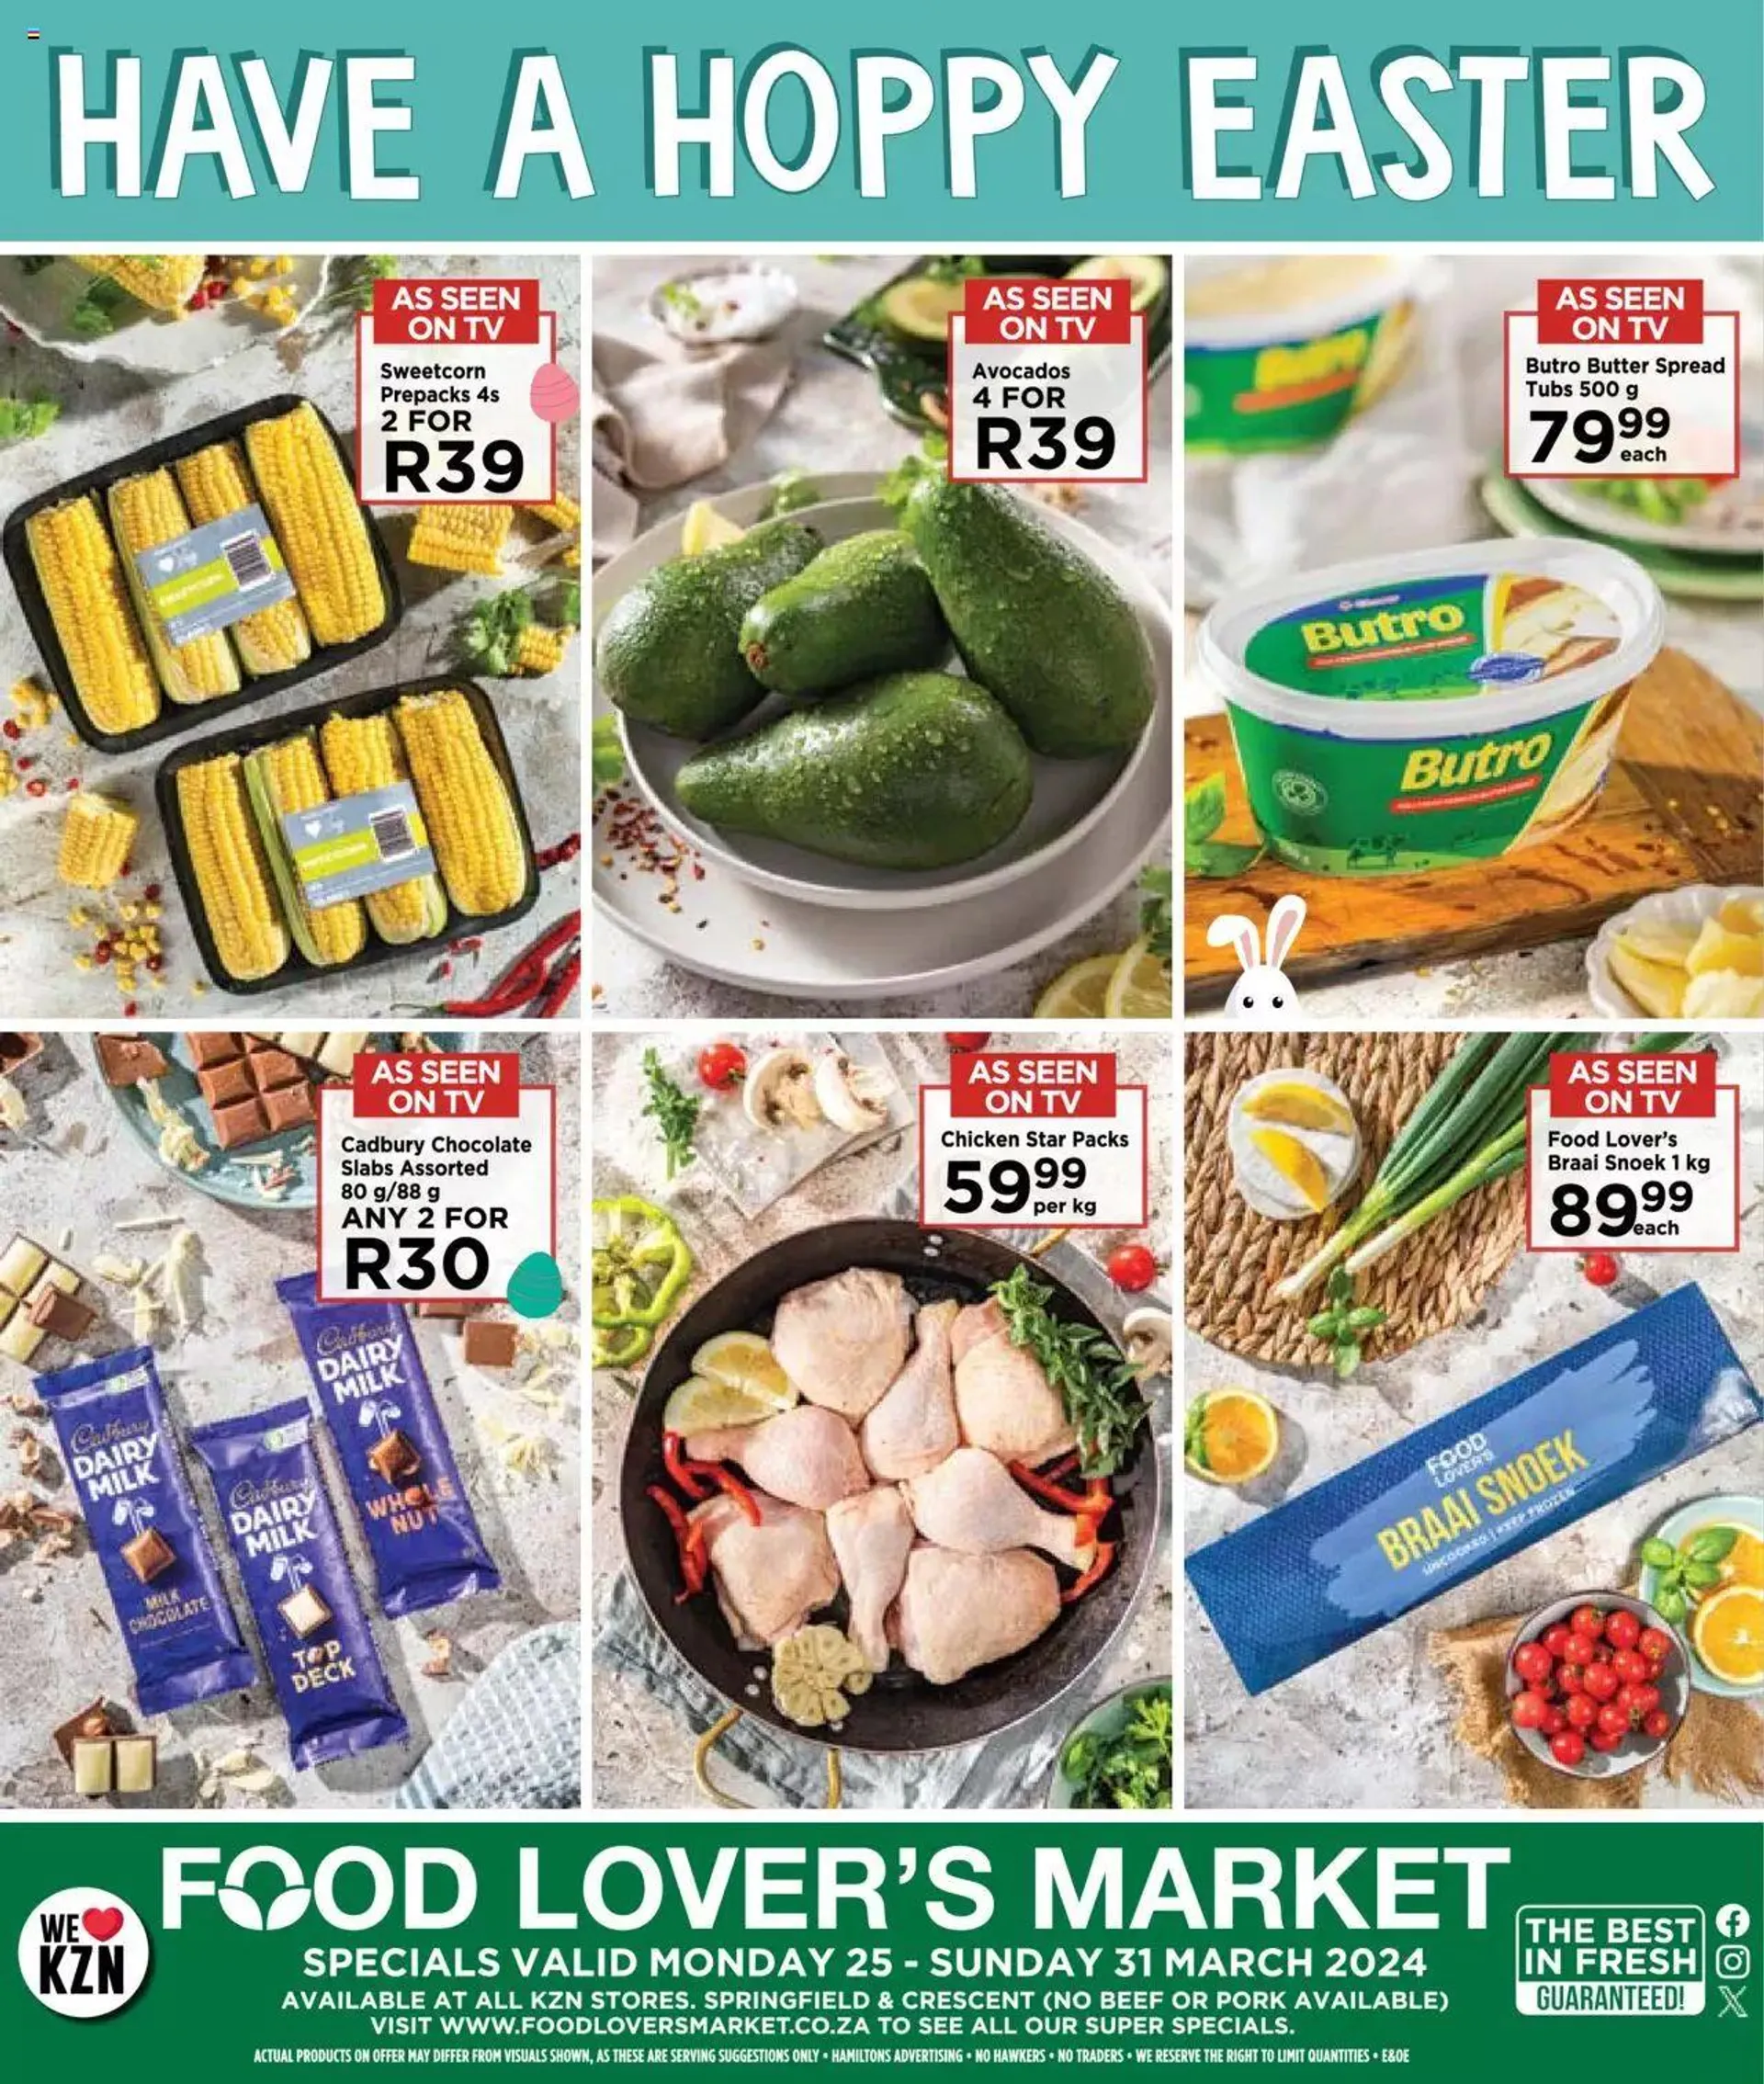 Food Lover's Market KwaZulu-Natal - Weekly Specials - 25 March 31 March 2024 - Page 1